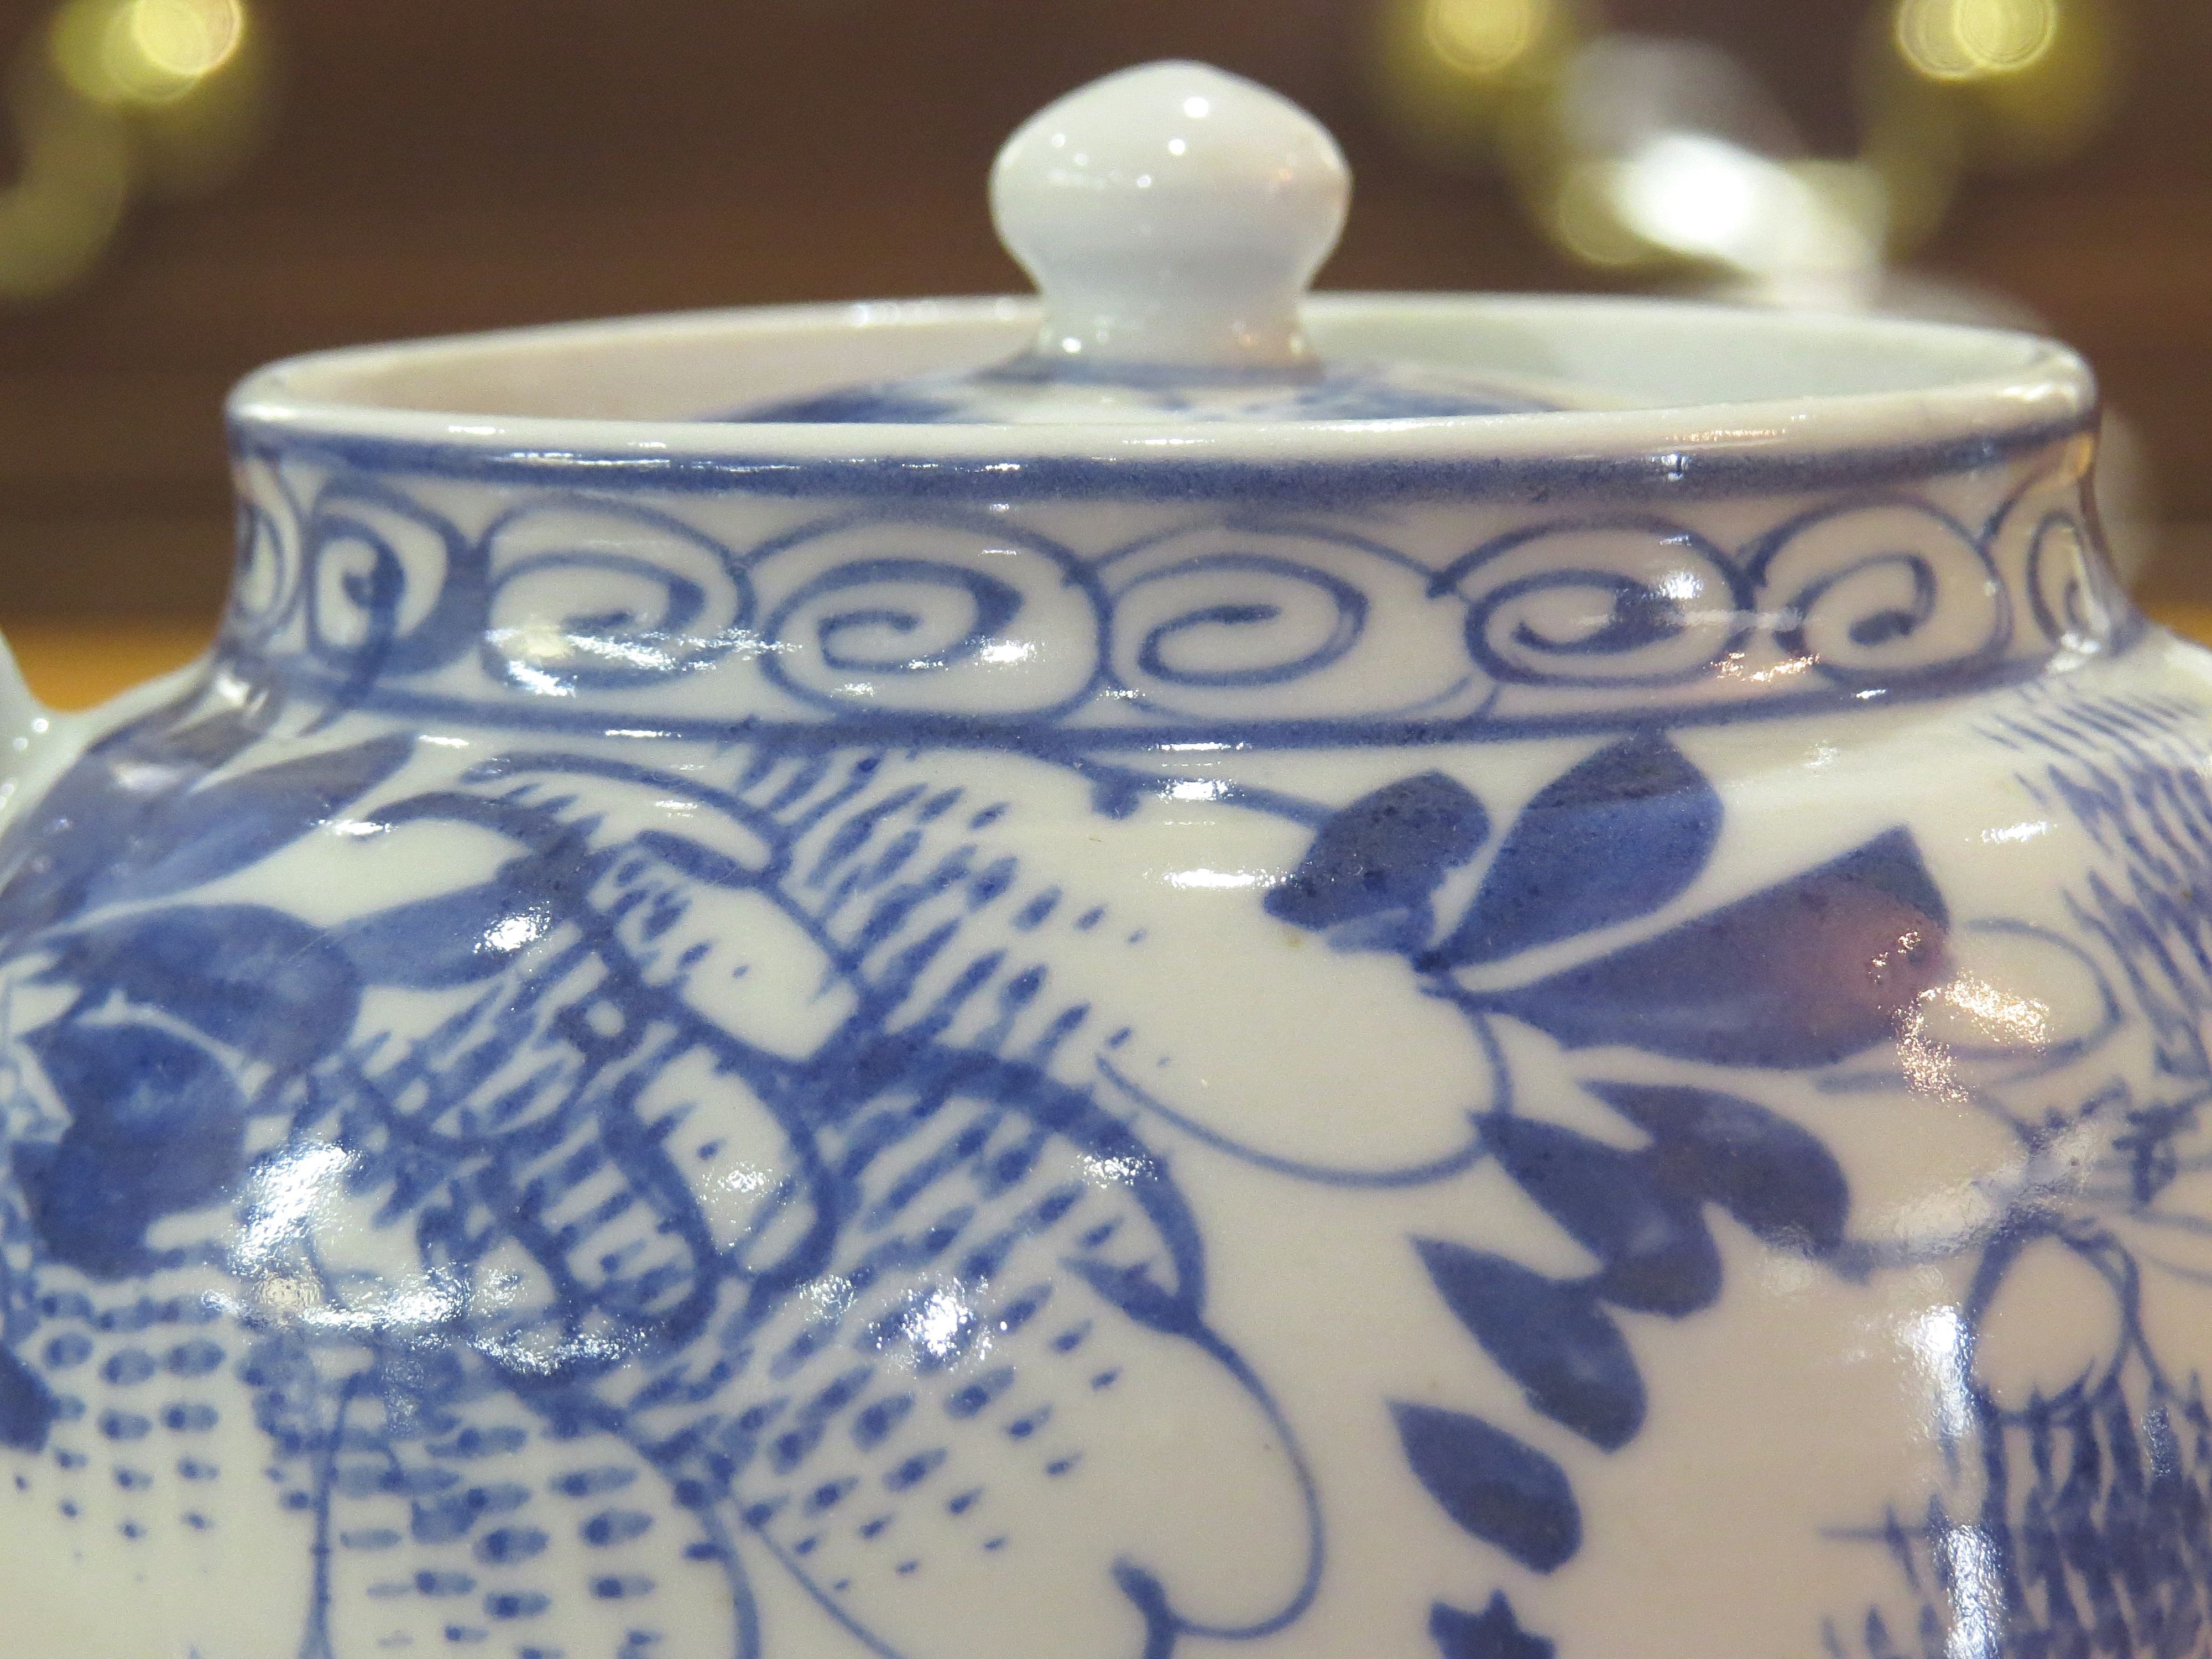 Chinese Export Blue & White Teapot